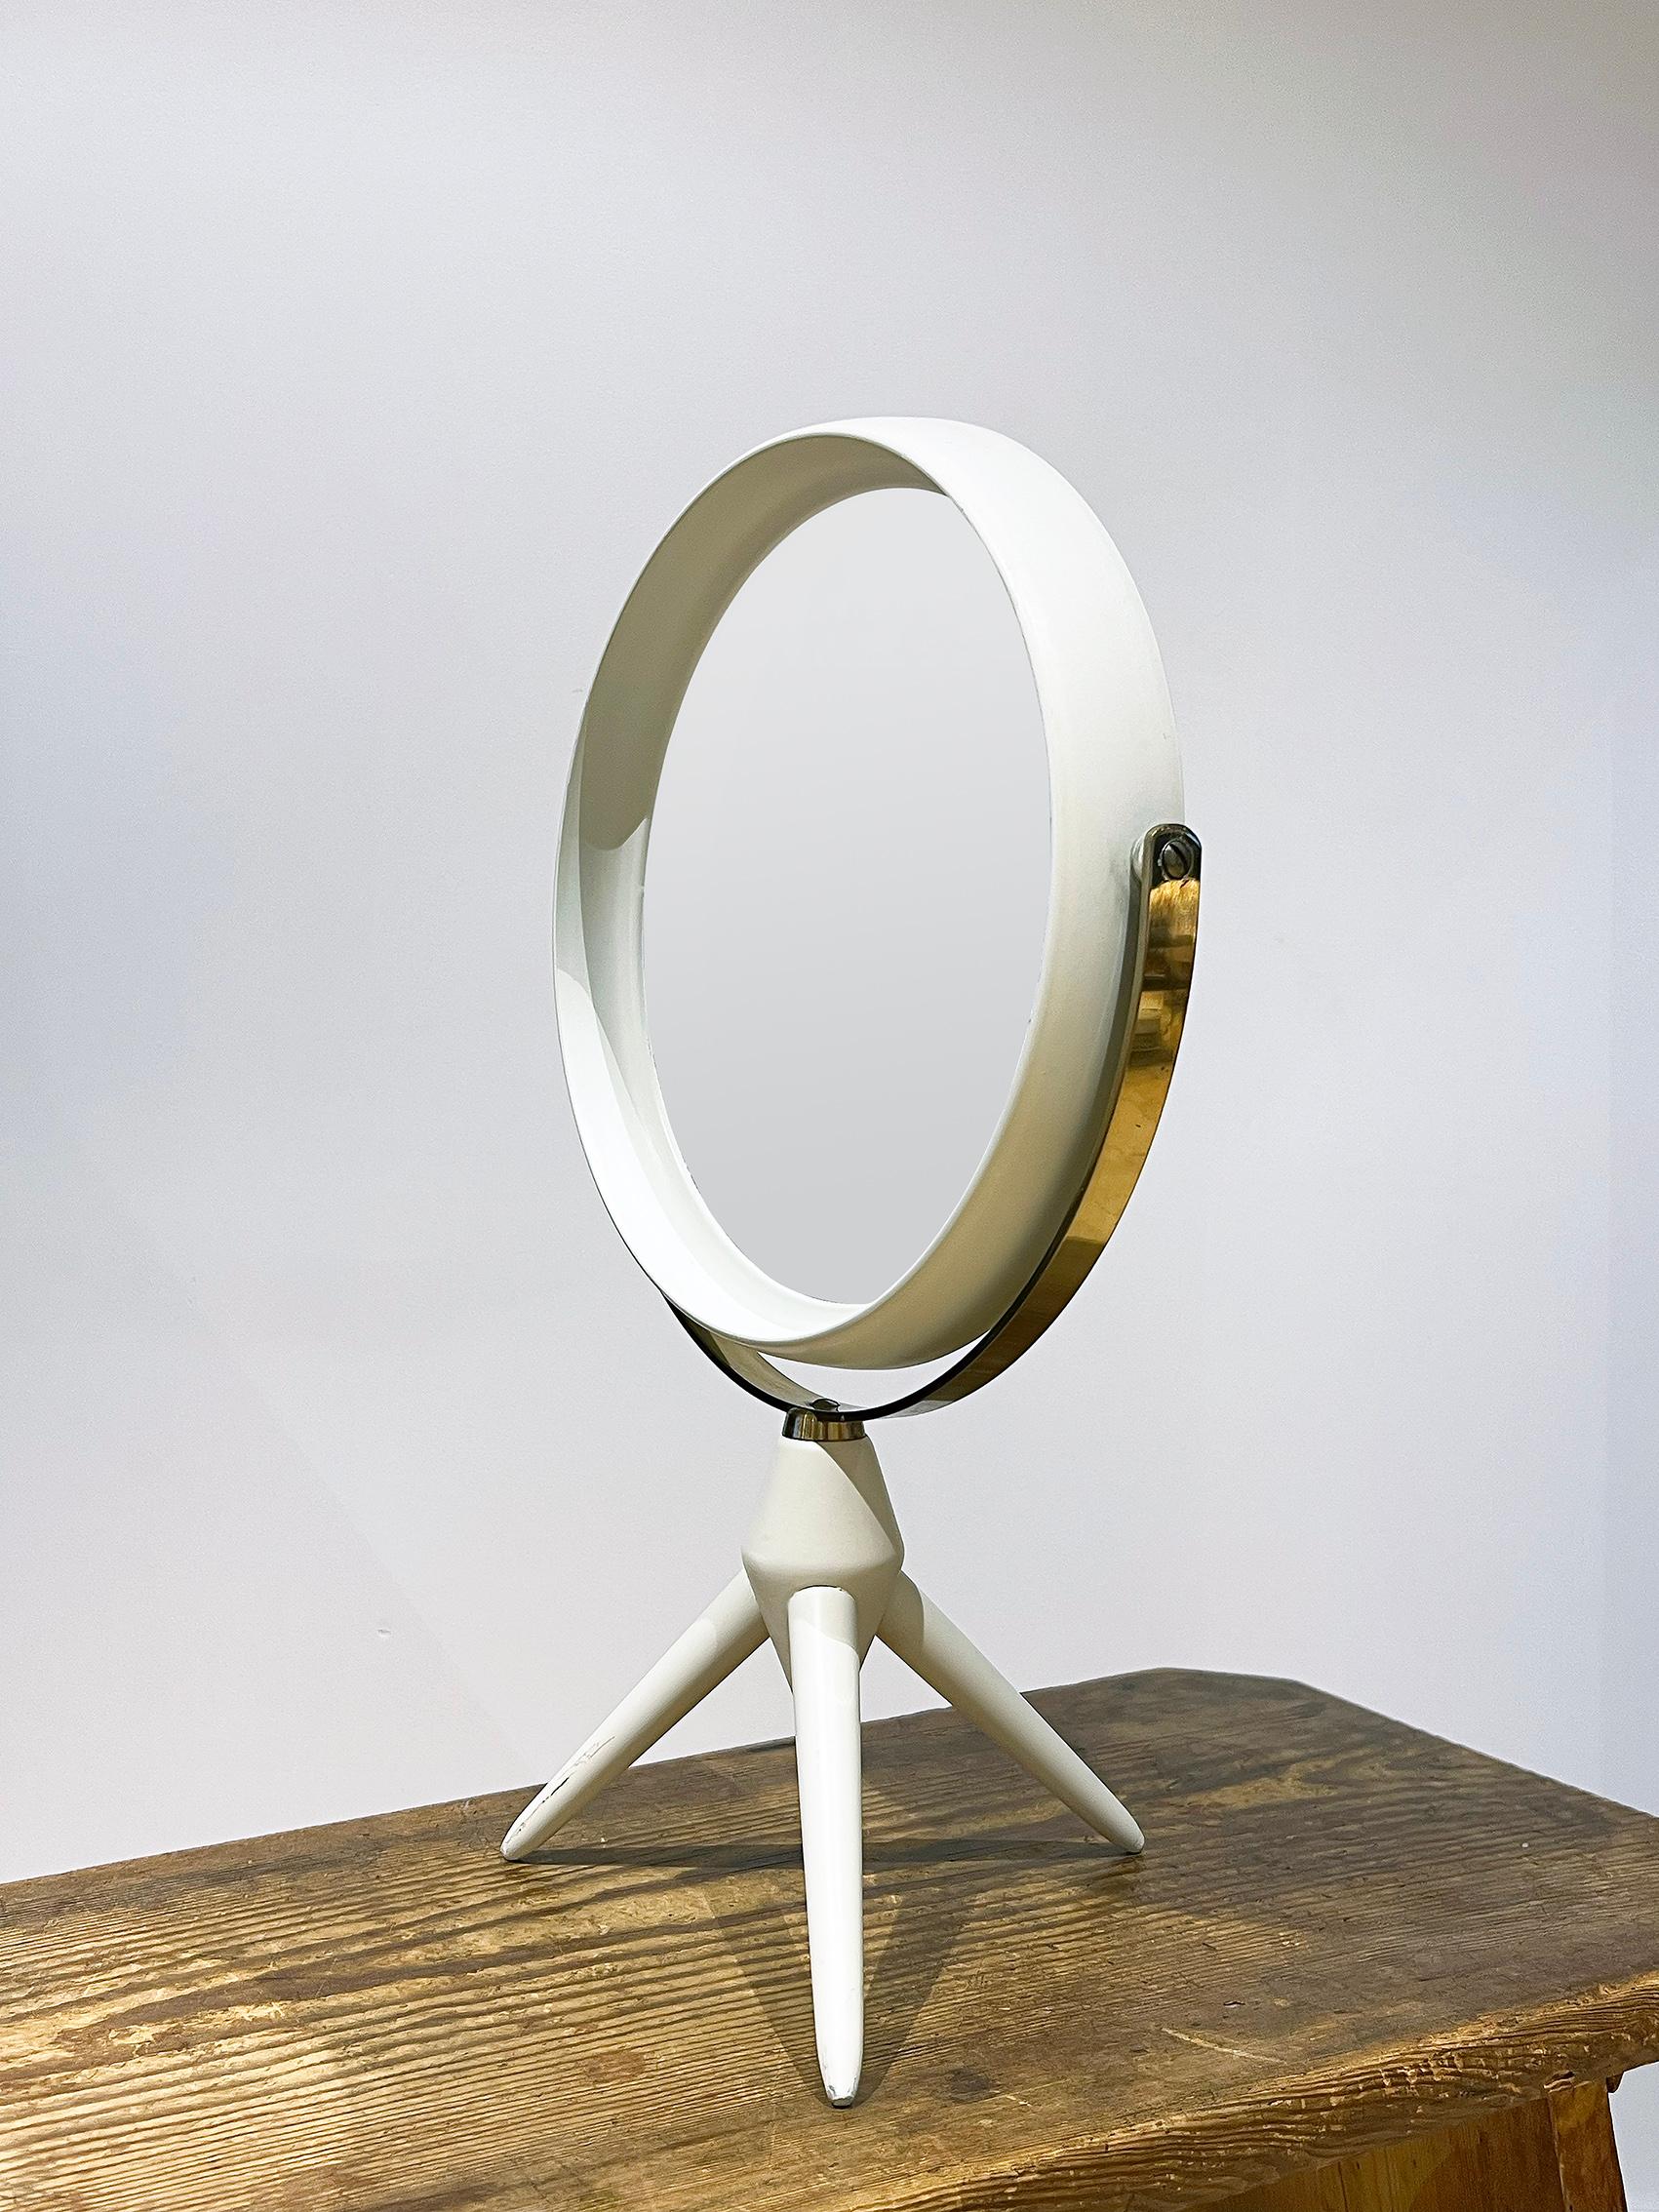 Cool scandinavian modern table mirror, ca 1950s/60s.
Unknown designer and maker. 
Good vintage condition, wear and patina consistent with age and use. 
Scratches, marks & blemishes. 